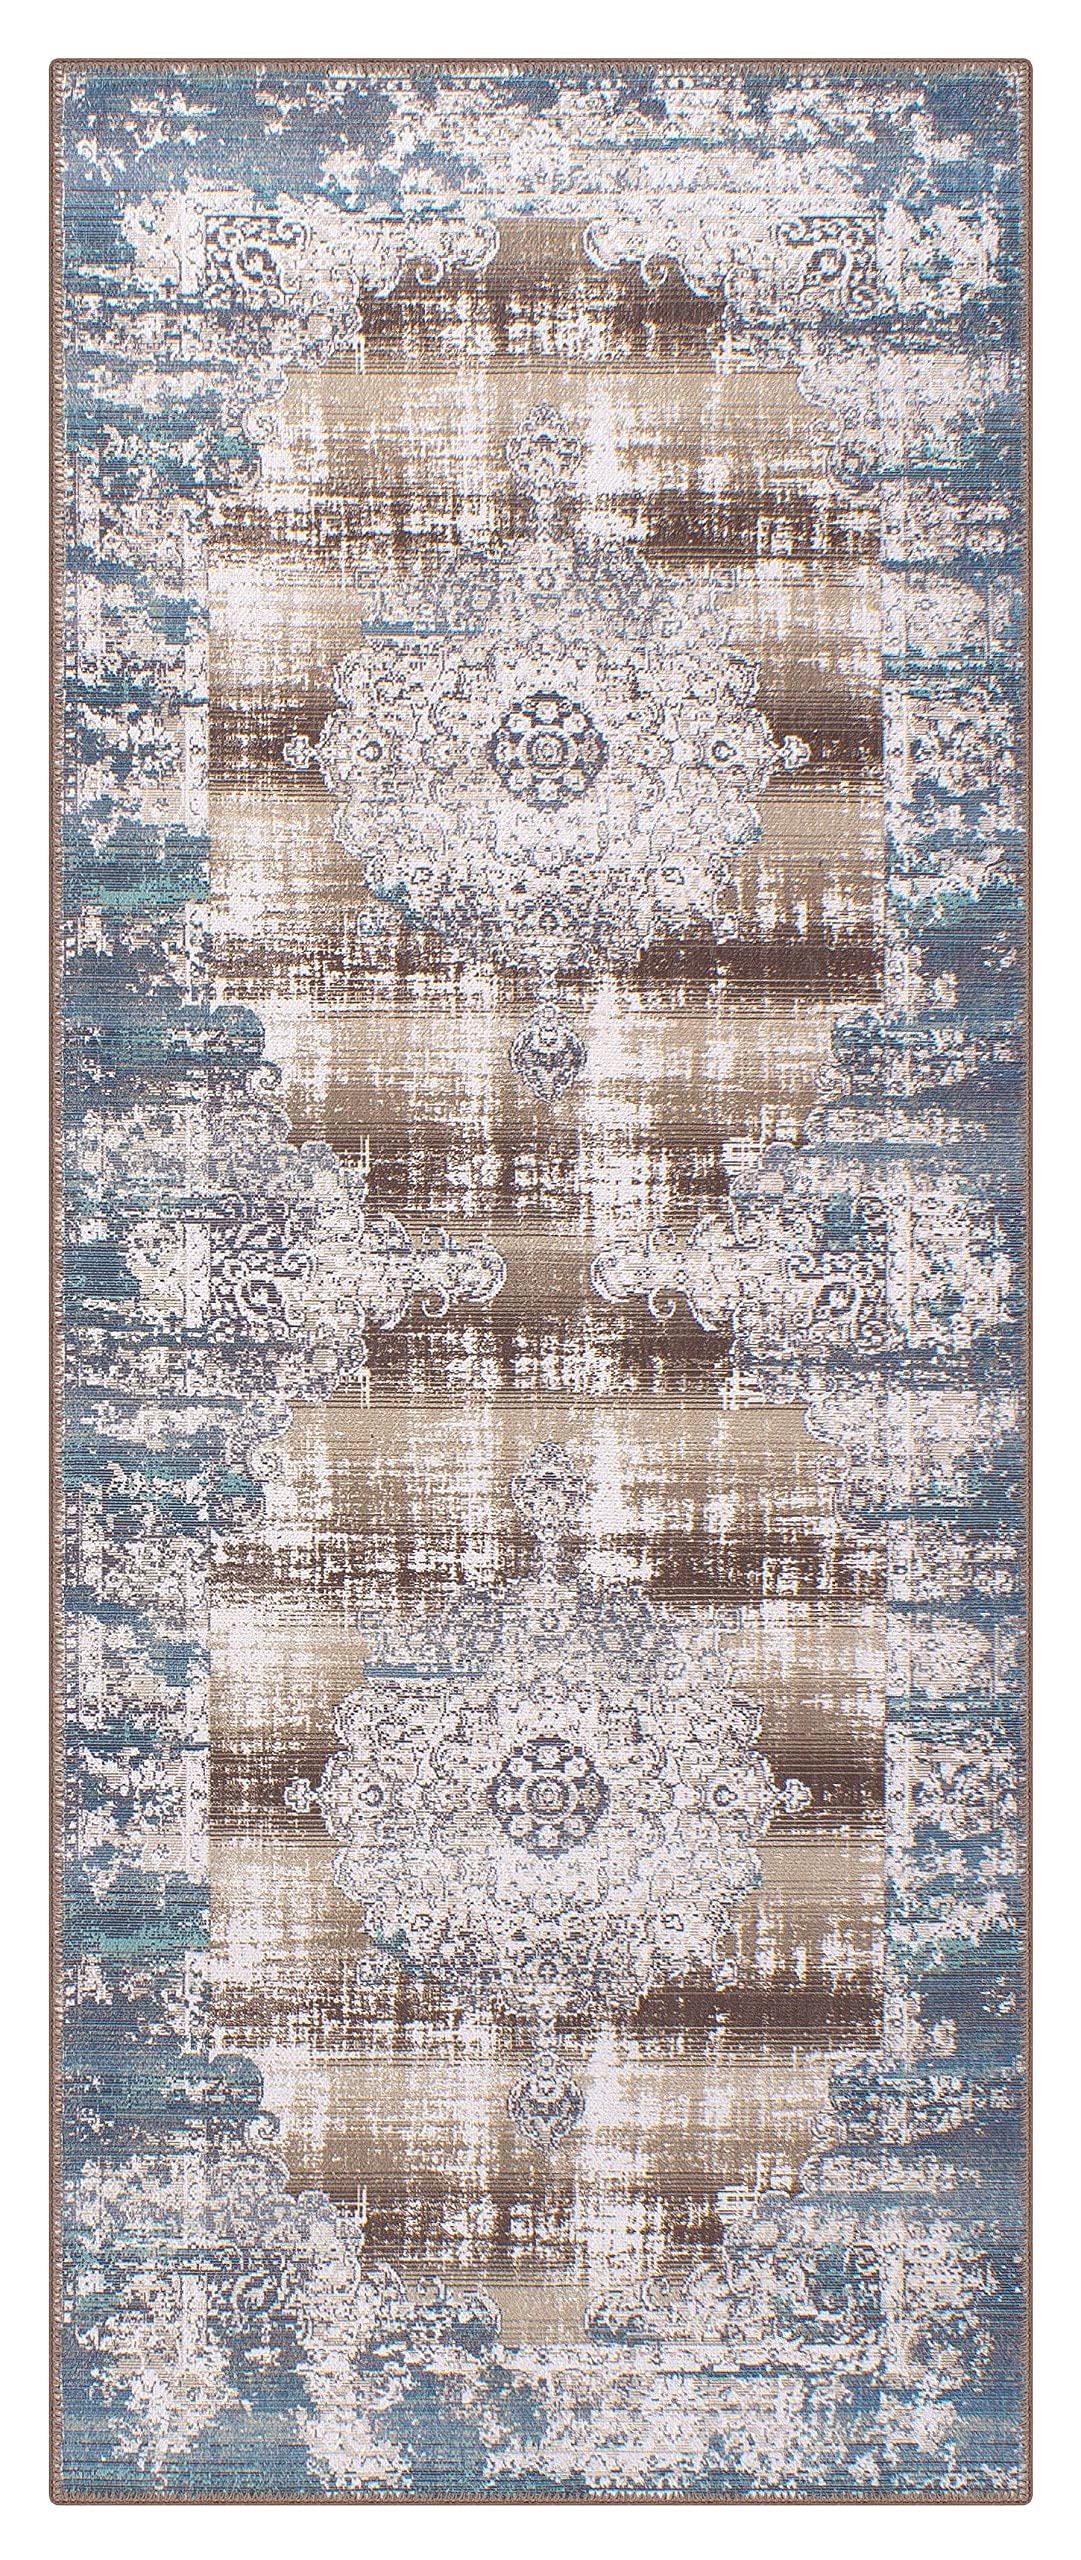 GLN Rugs Machine Washable Area Rug, Rugs for Living Room, Rugs for Bedroom, Bathroom Rug, Kitchen Rug, Printed Vintage Rug, Home Decor Traditional Carpet (Green/Brown, 3' x 5'2")